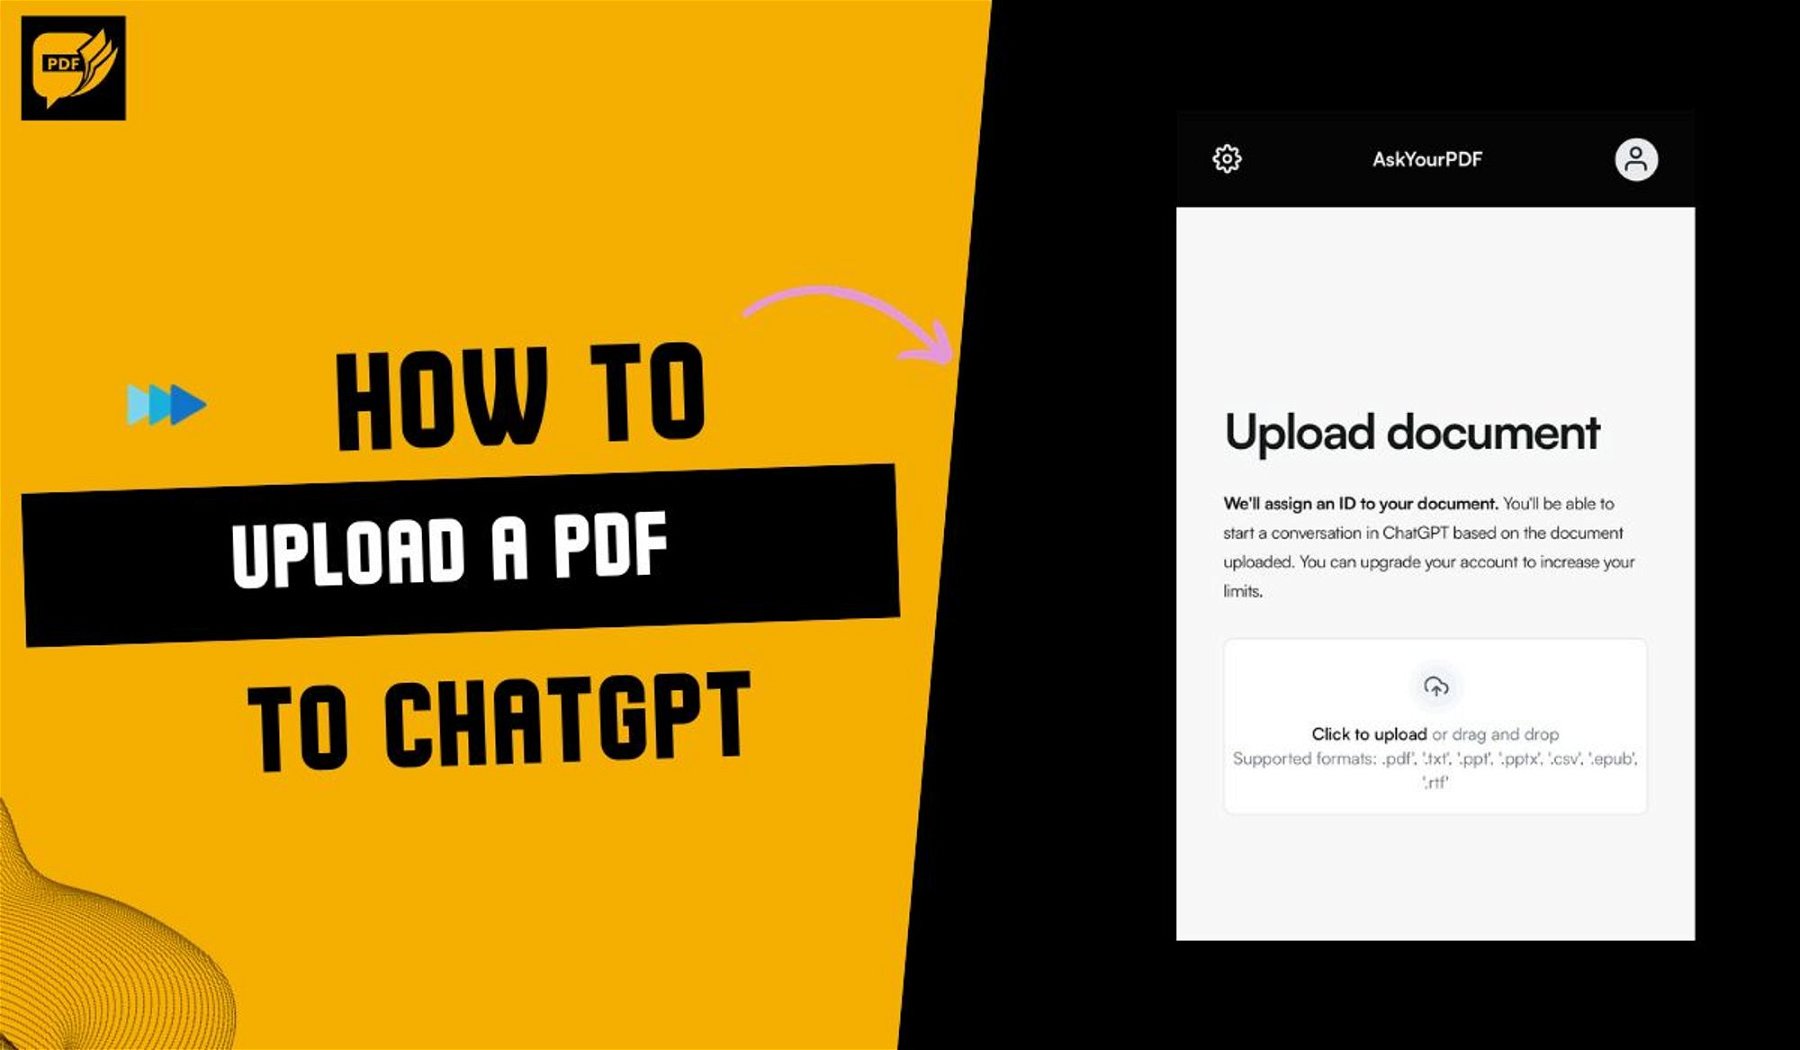 How to Upload a PDF to ChatGPT